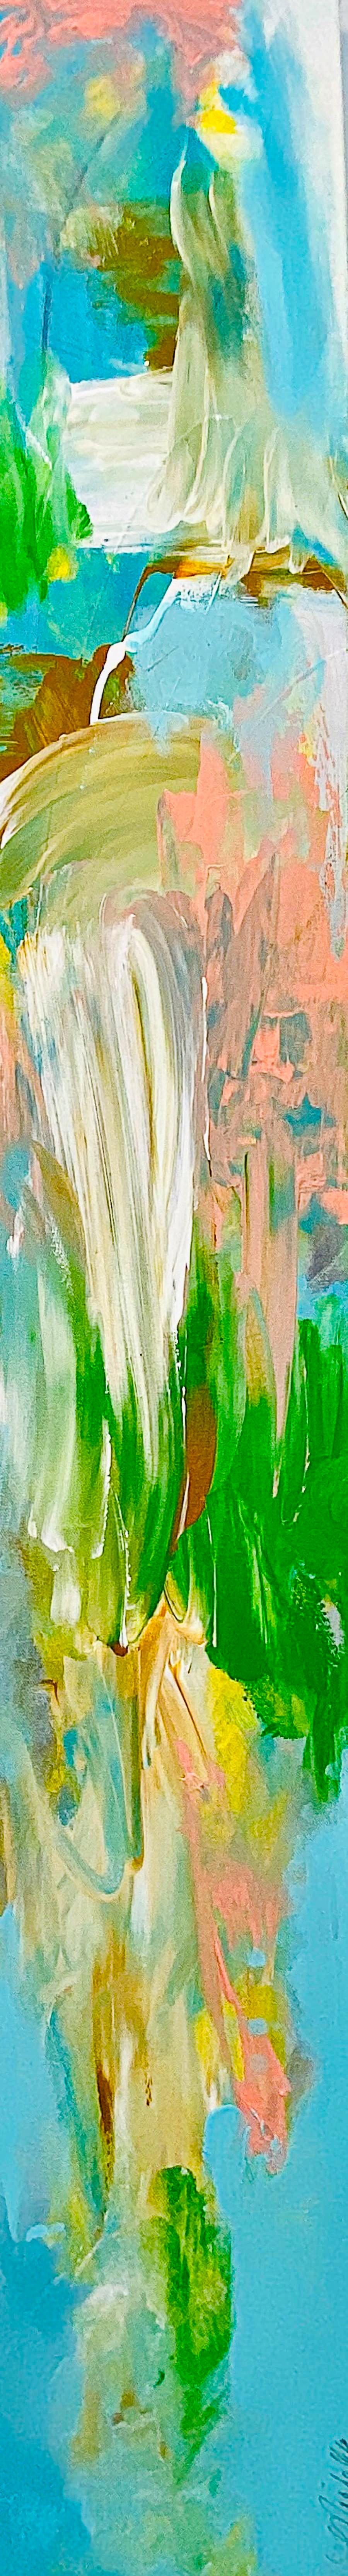 Michelle Thomas Artist Abstract Painting - "Song of Spring", Landscape Abstract, Emotional, Pastel, Blue, Peach, Green